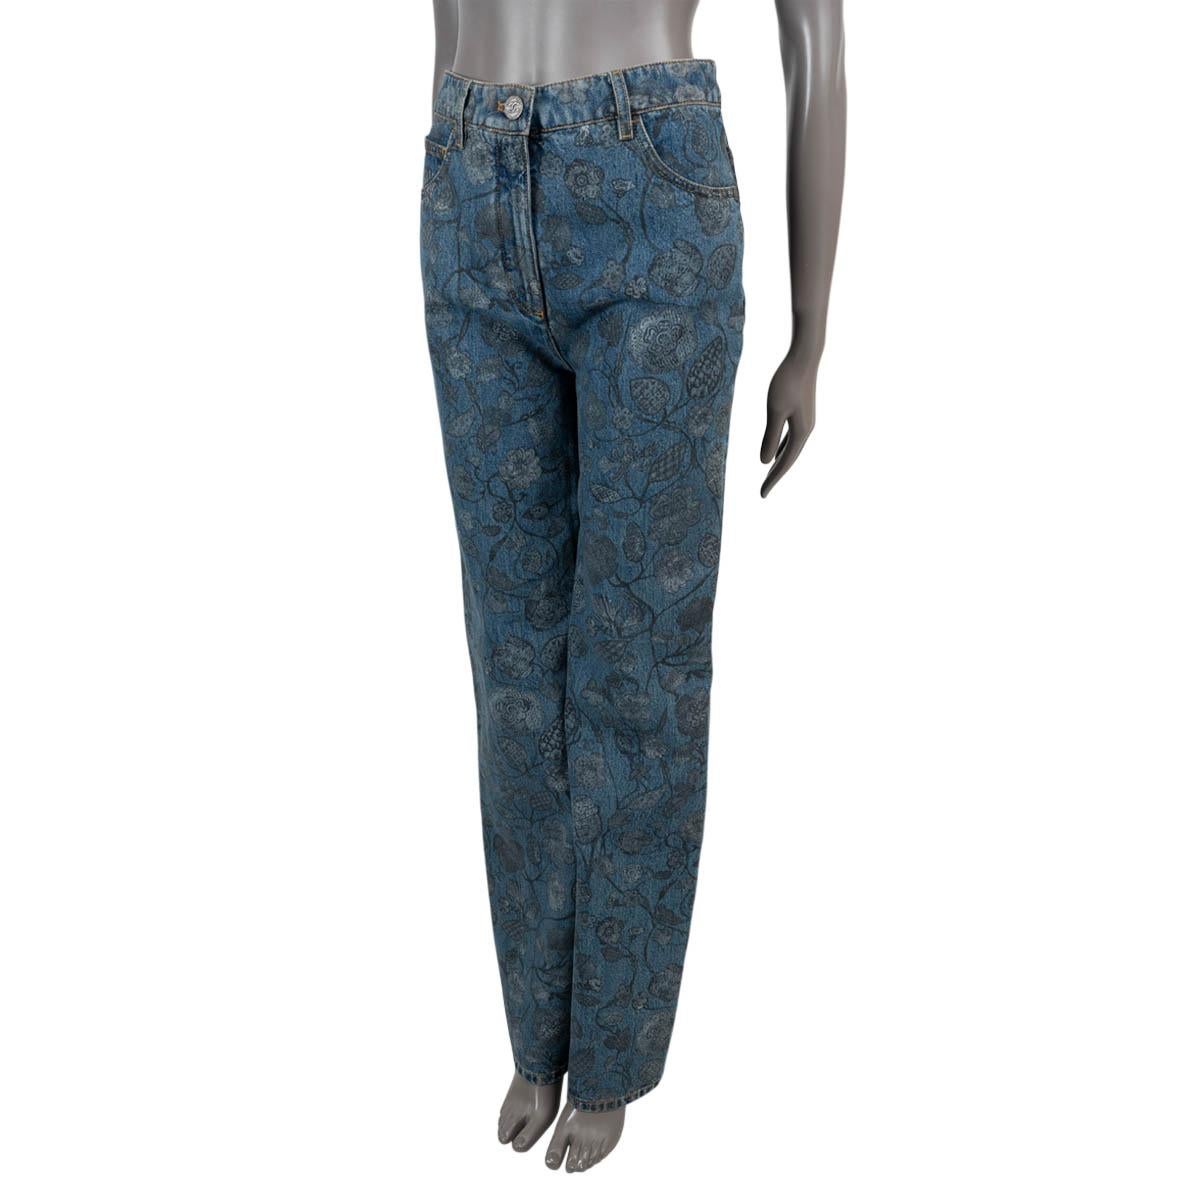 100% authentic Chanel straight-leg jeans in blue denim (please note the content tag is missing) with gray hand painted floral pattern. Features a high rise and classic five pocket design. Closes with a metal CC button and are unlined. Have been worn